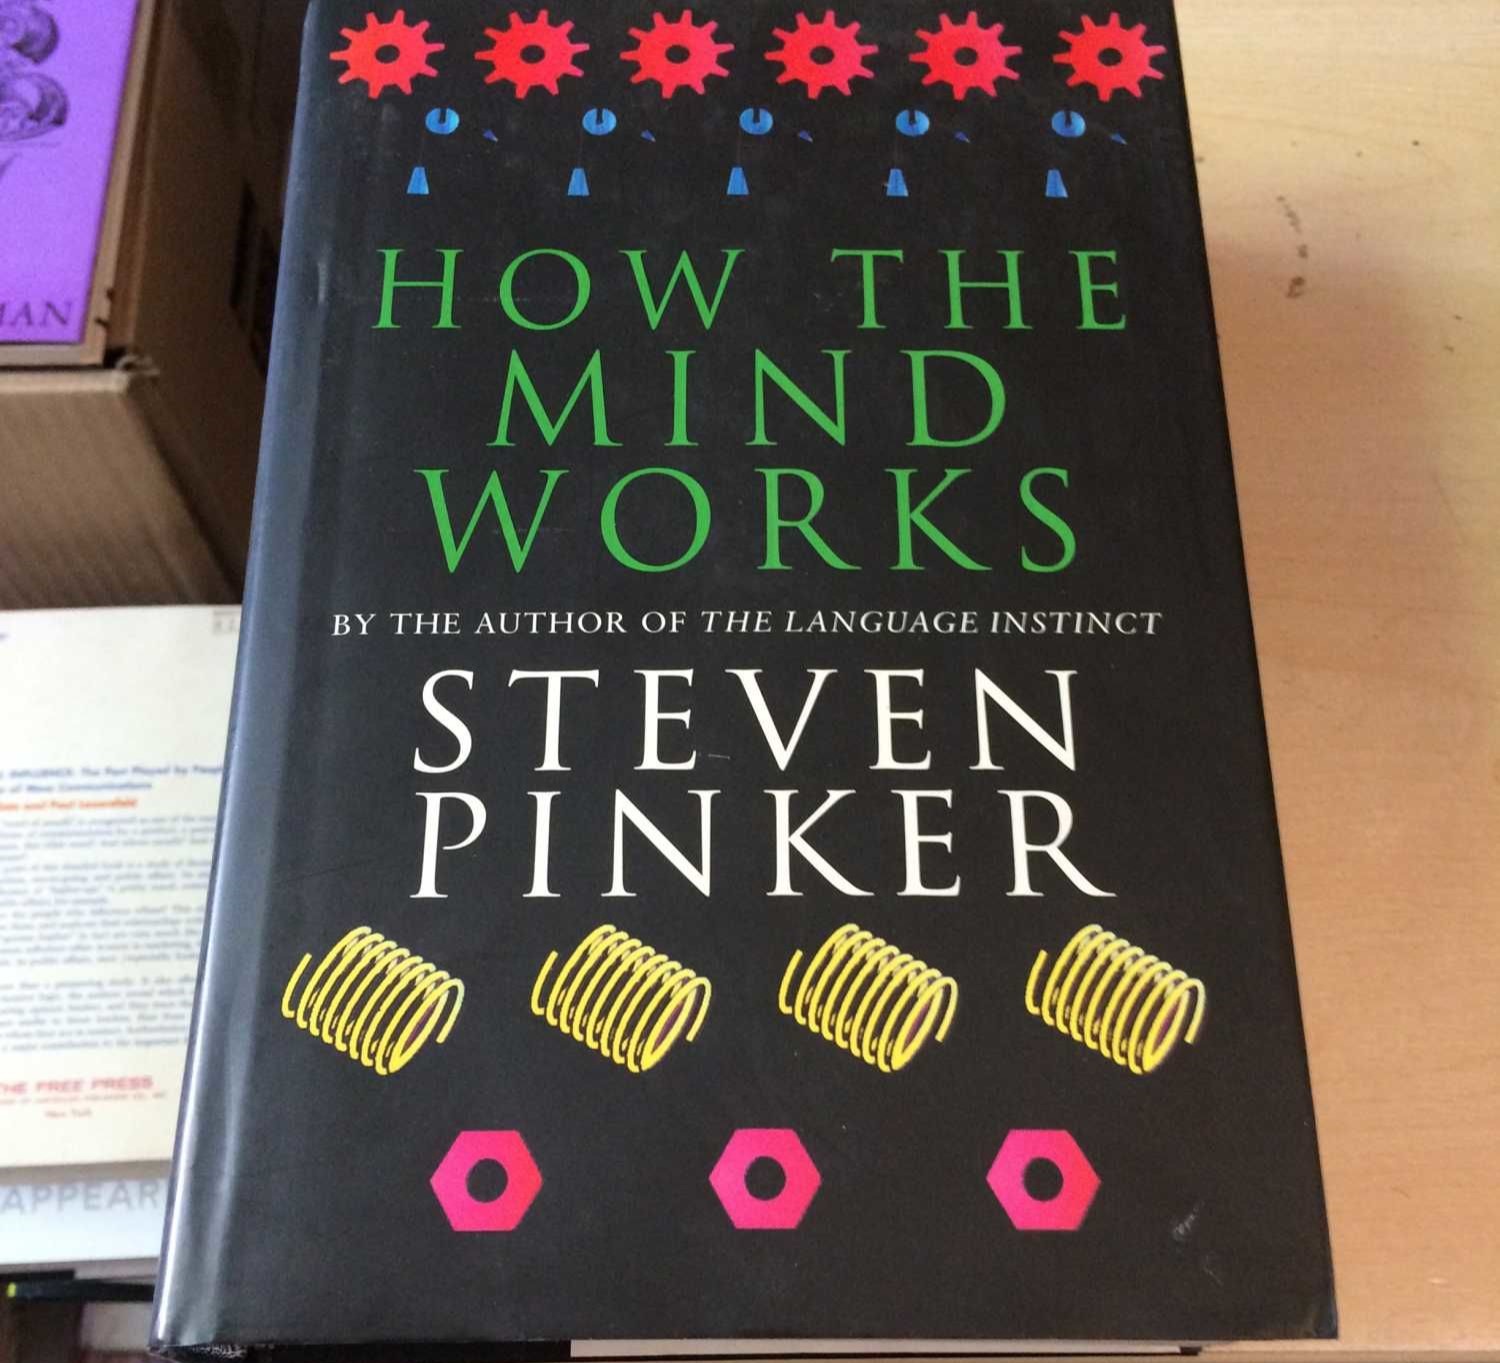 11-unbelievable-facts-about-how-the-mind-works-steven-pinker